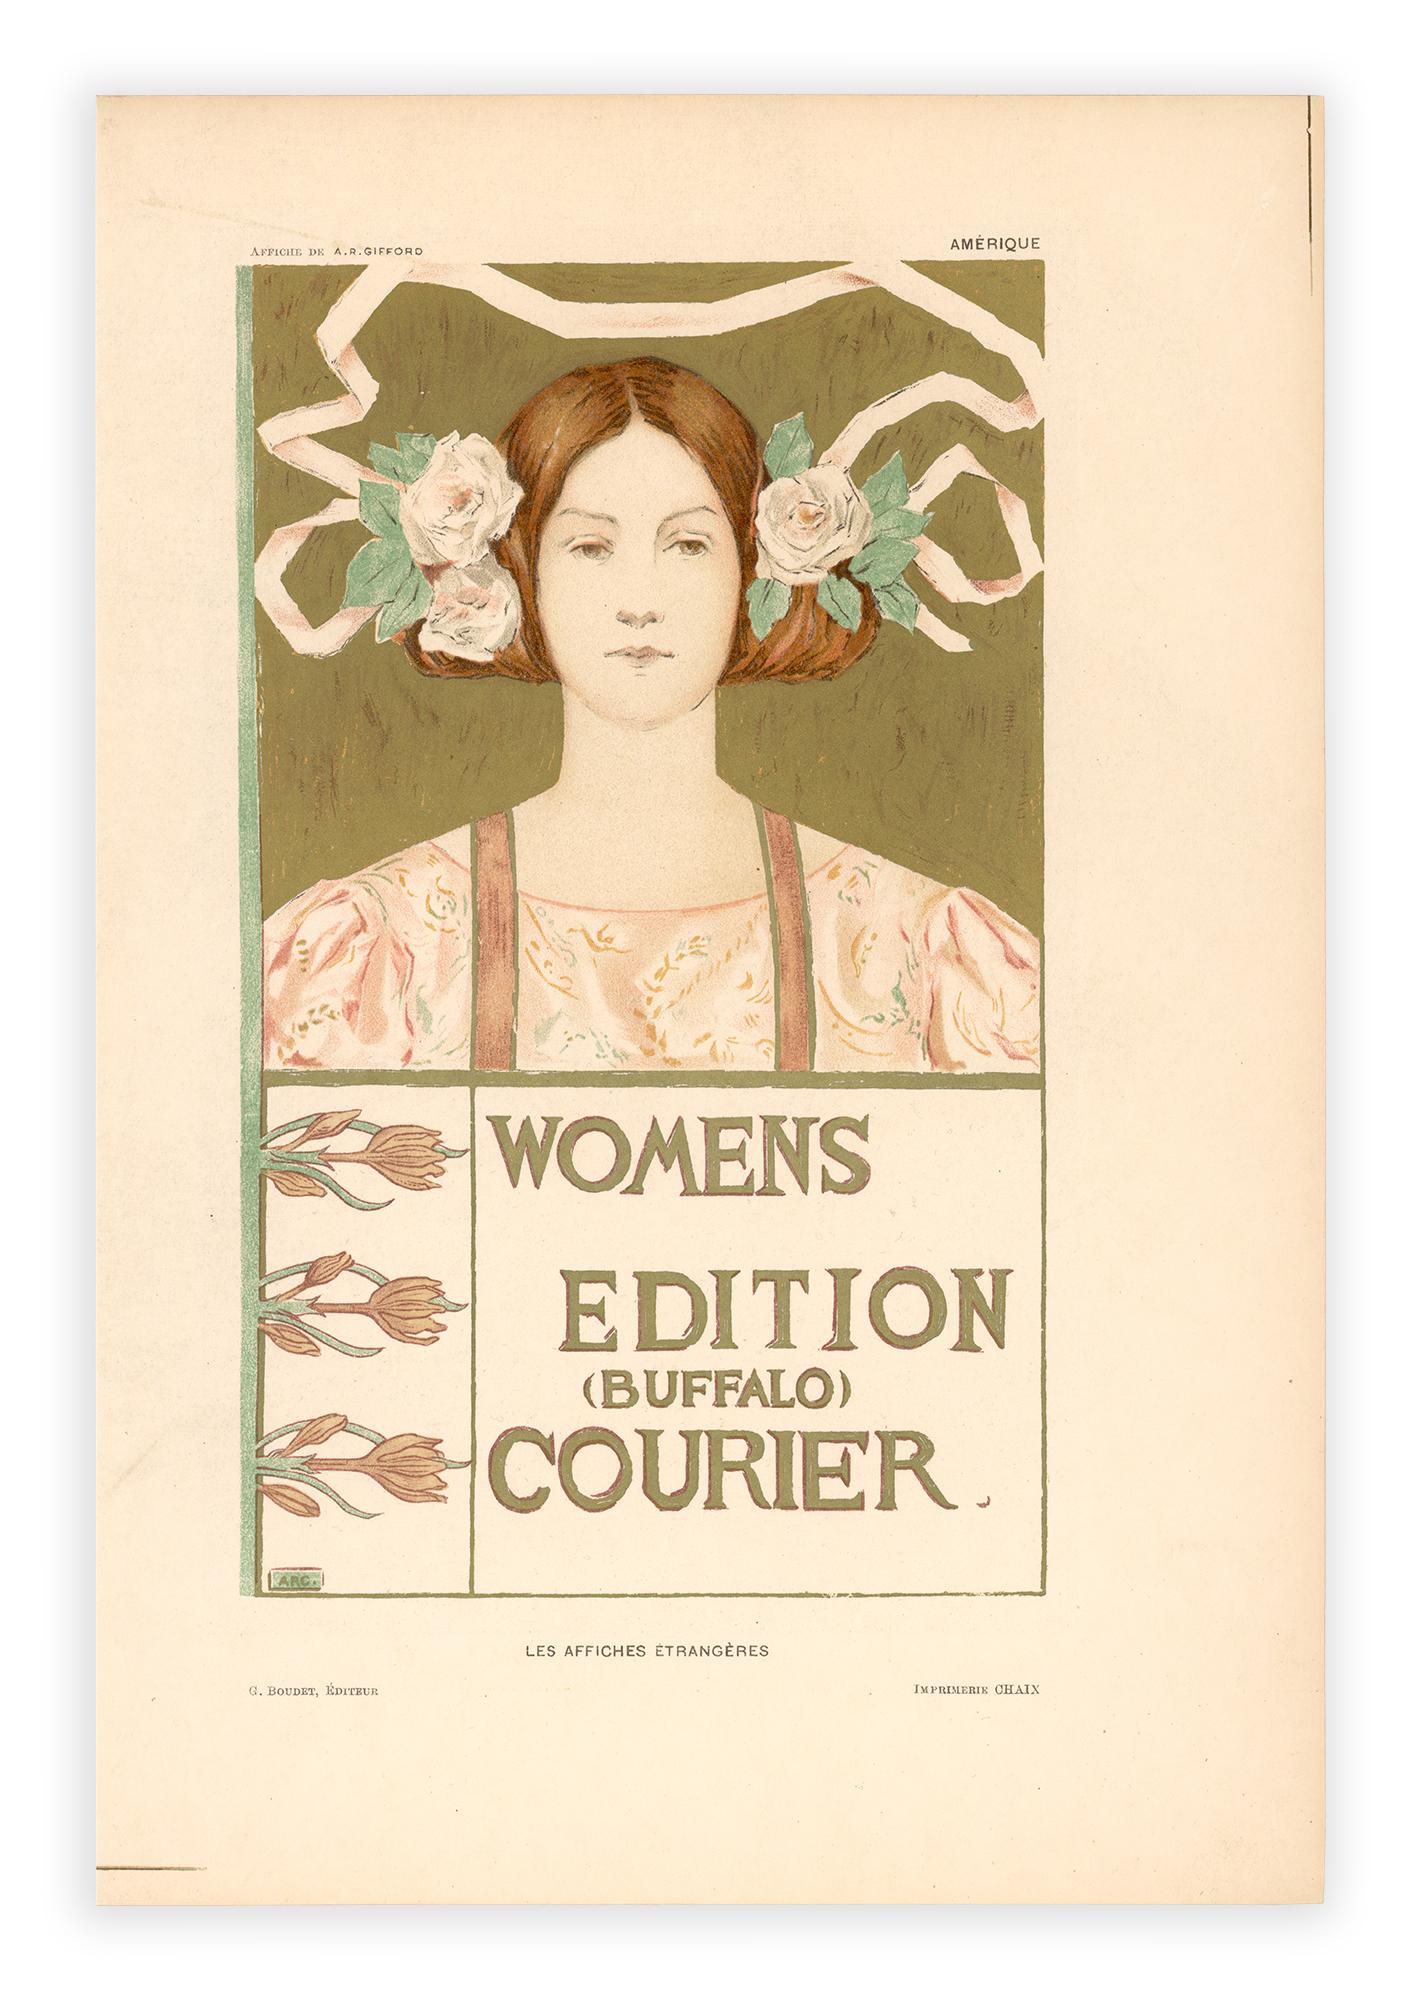 Alice Russell Glenny’s Women's Edition Buffalo Courier, 1897 lithograph on Japon paper produced with a plate of metallic gold ink.

While this poster was printed in multiple sizes and formats, this edition of 25 strikes on Japon paper from 1897 is